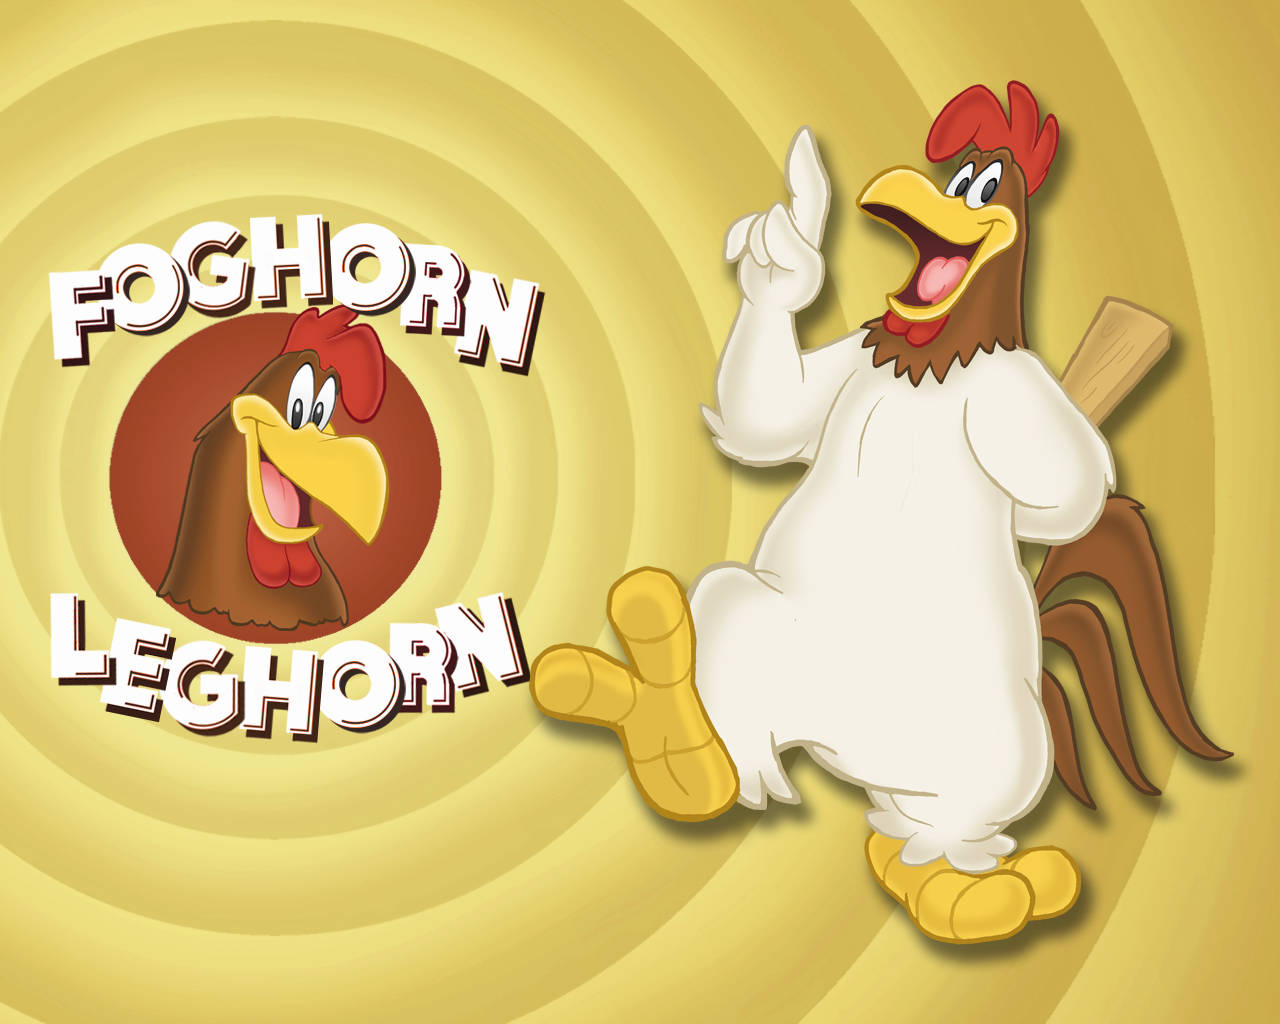 Free Foghorn Leghorn Chicken Hawk Viewing Gallery For Your Desktop, Mobile & Tablet. Explore Foghorn Leghorn Wallpaper. Foghorn Leghorn Wallpaper